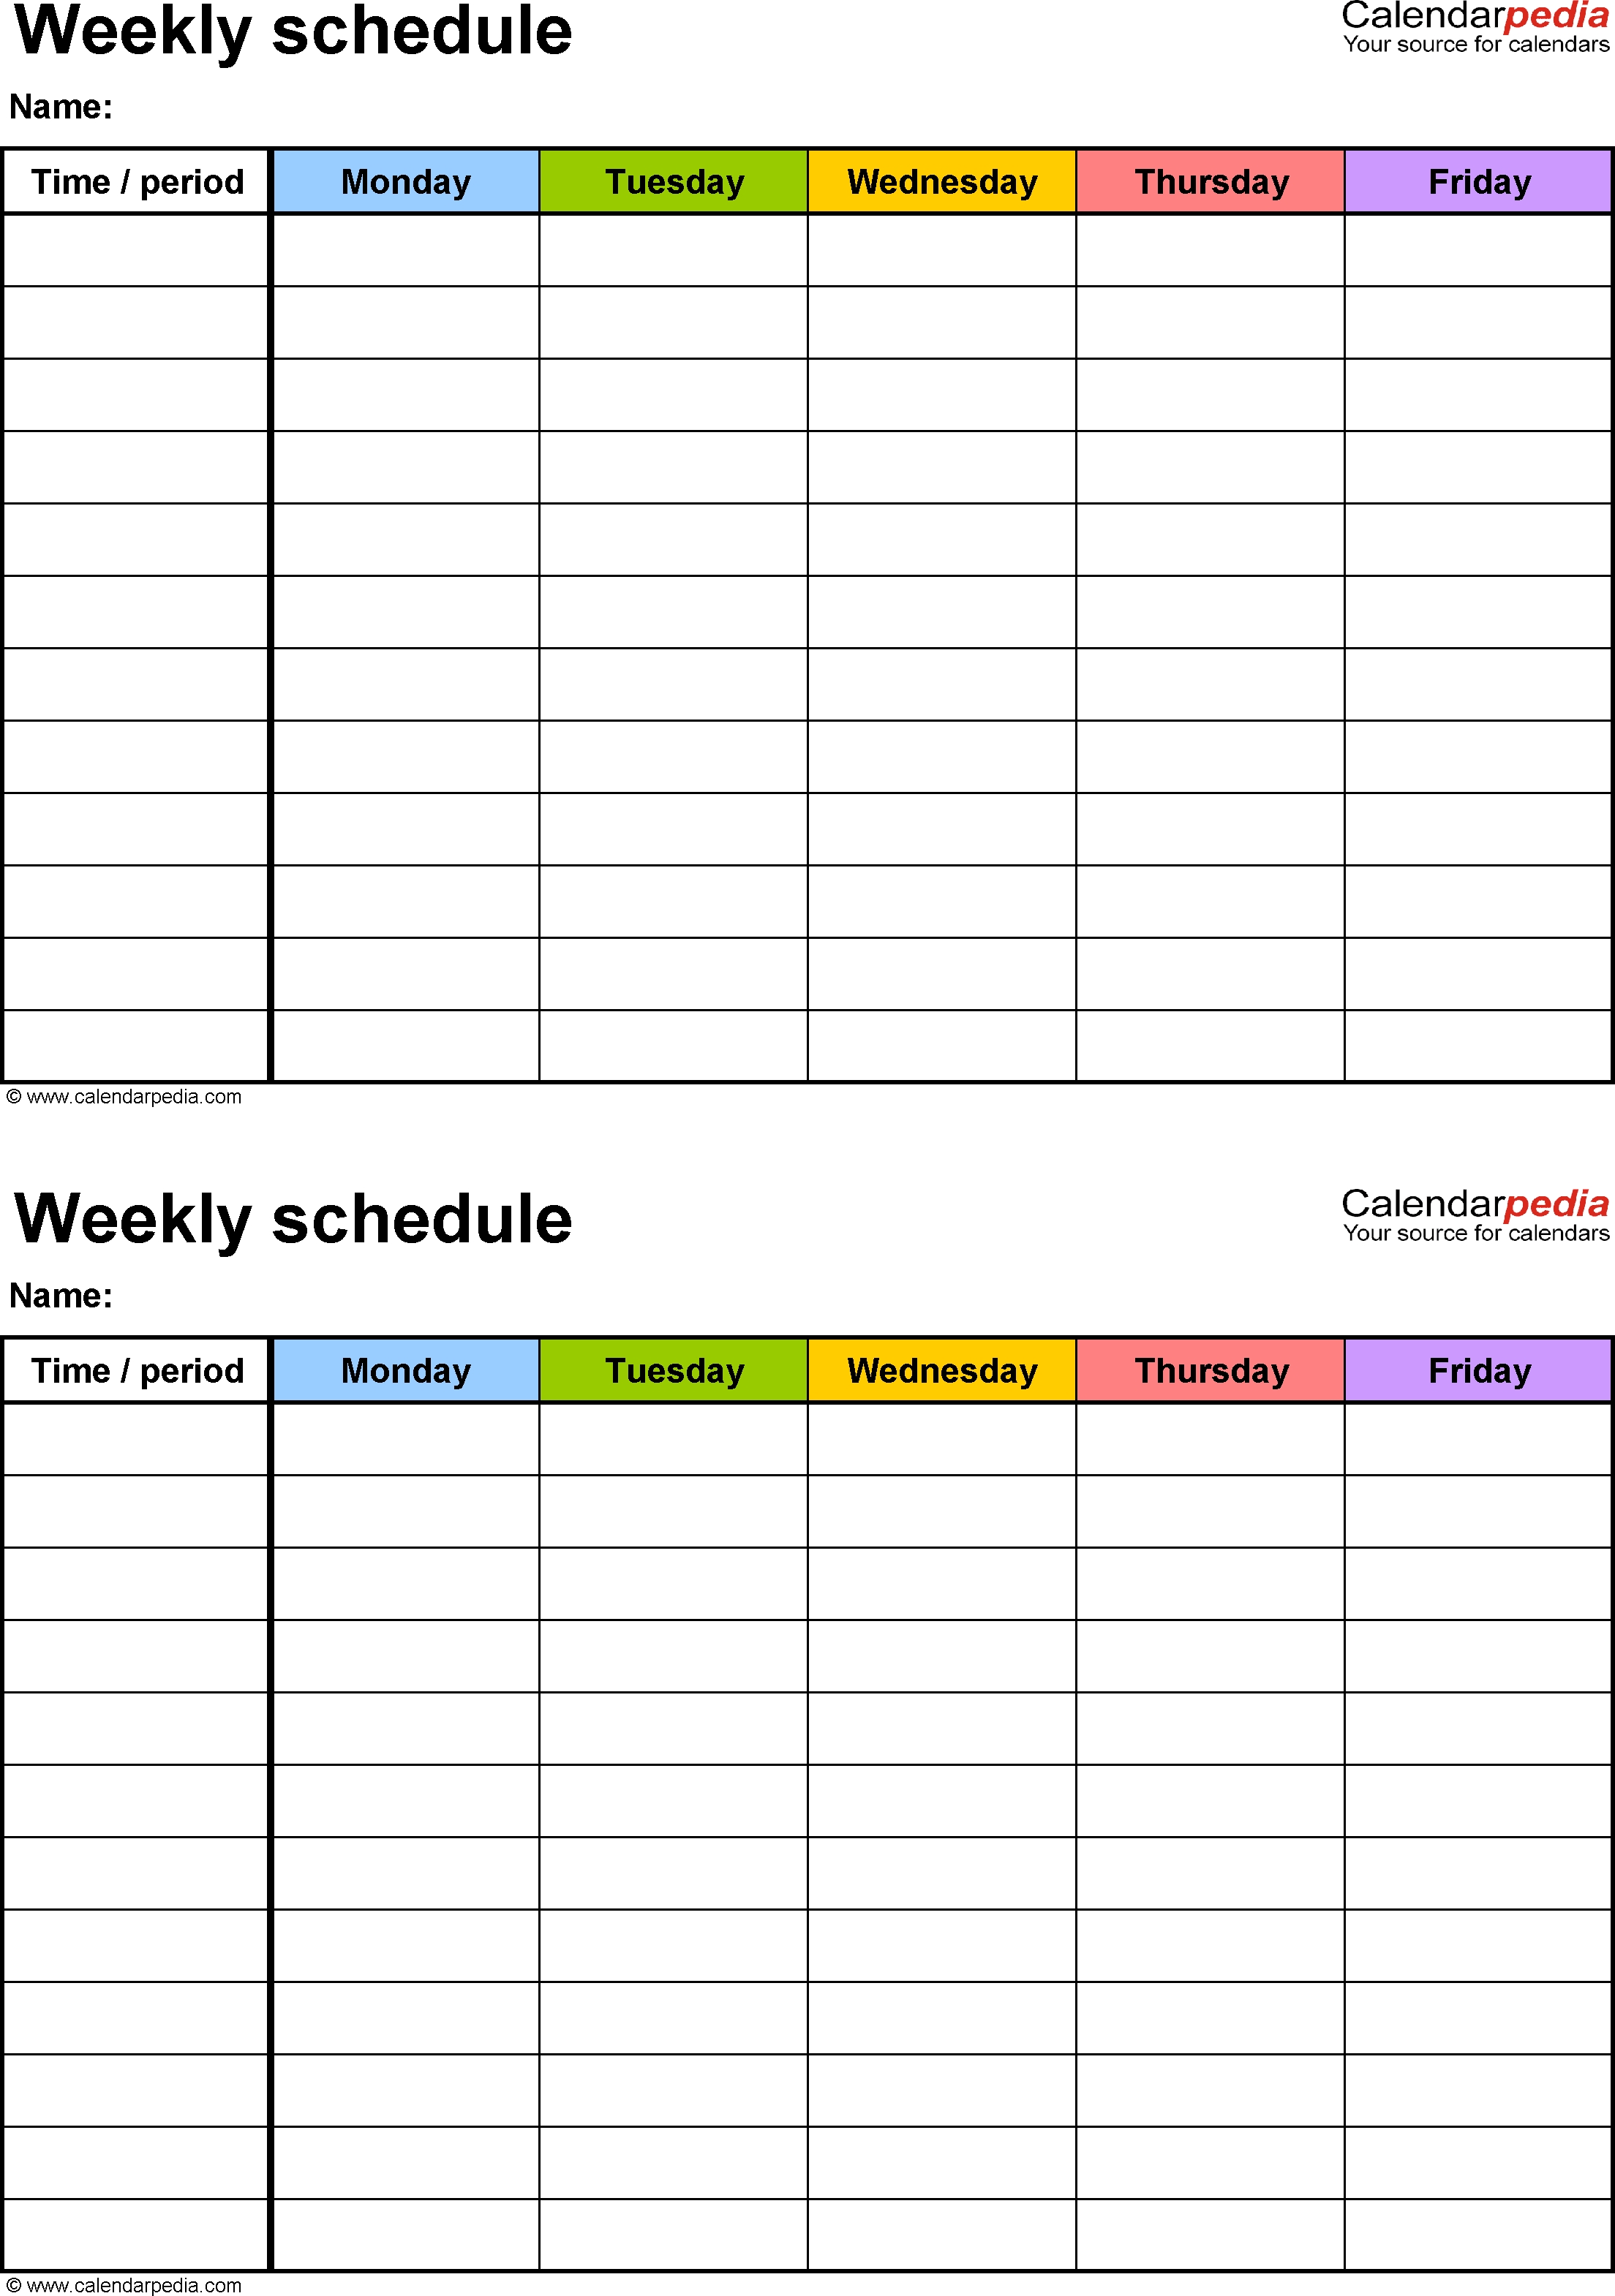 Free Weekly Schedule Templates For Word - 18 Templates  Weekly Schedule Monday Through Friday